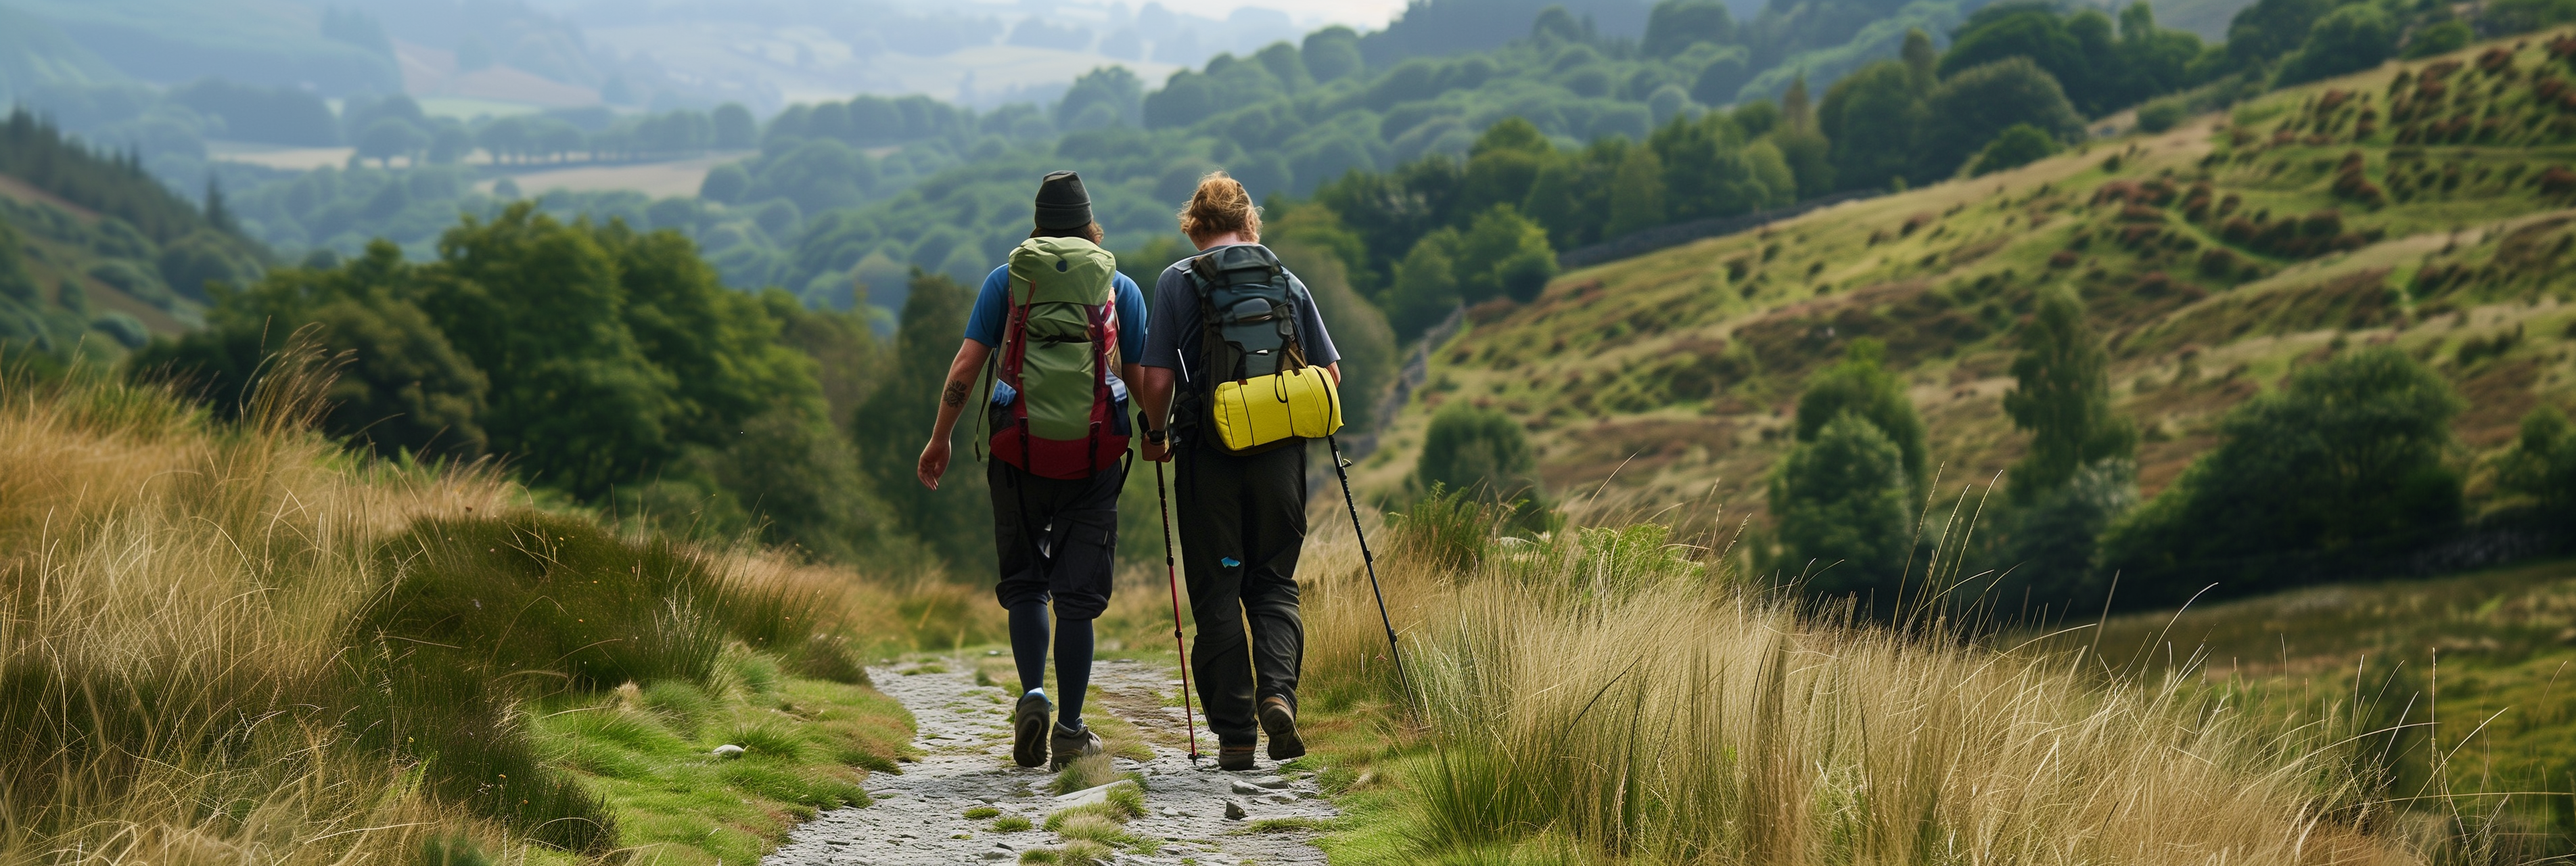 Preparing for a UK Walking Holiday: Tips for Planning and Packing